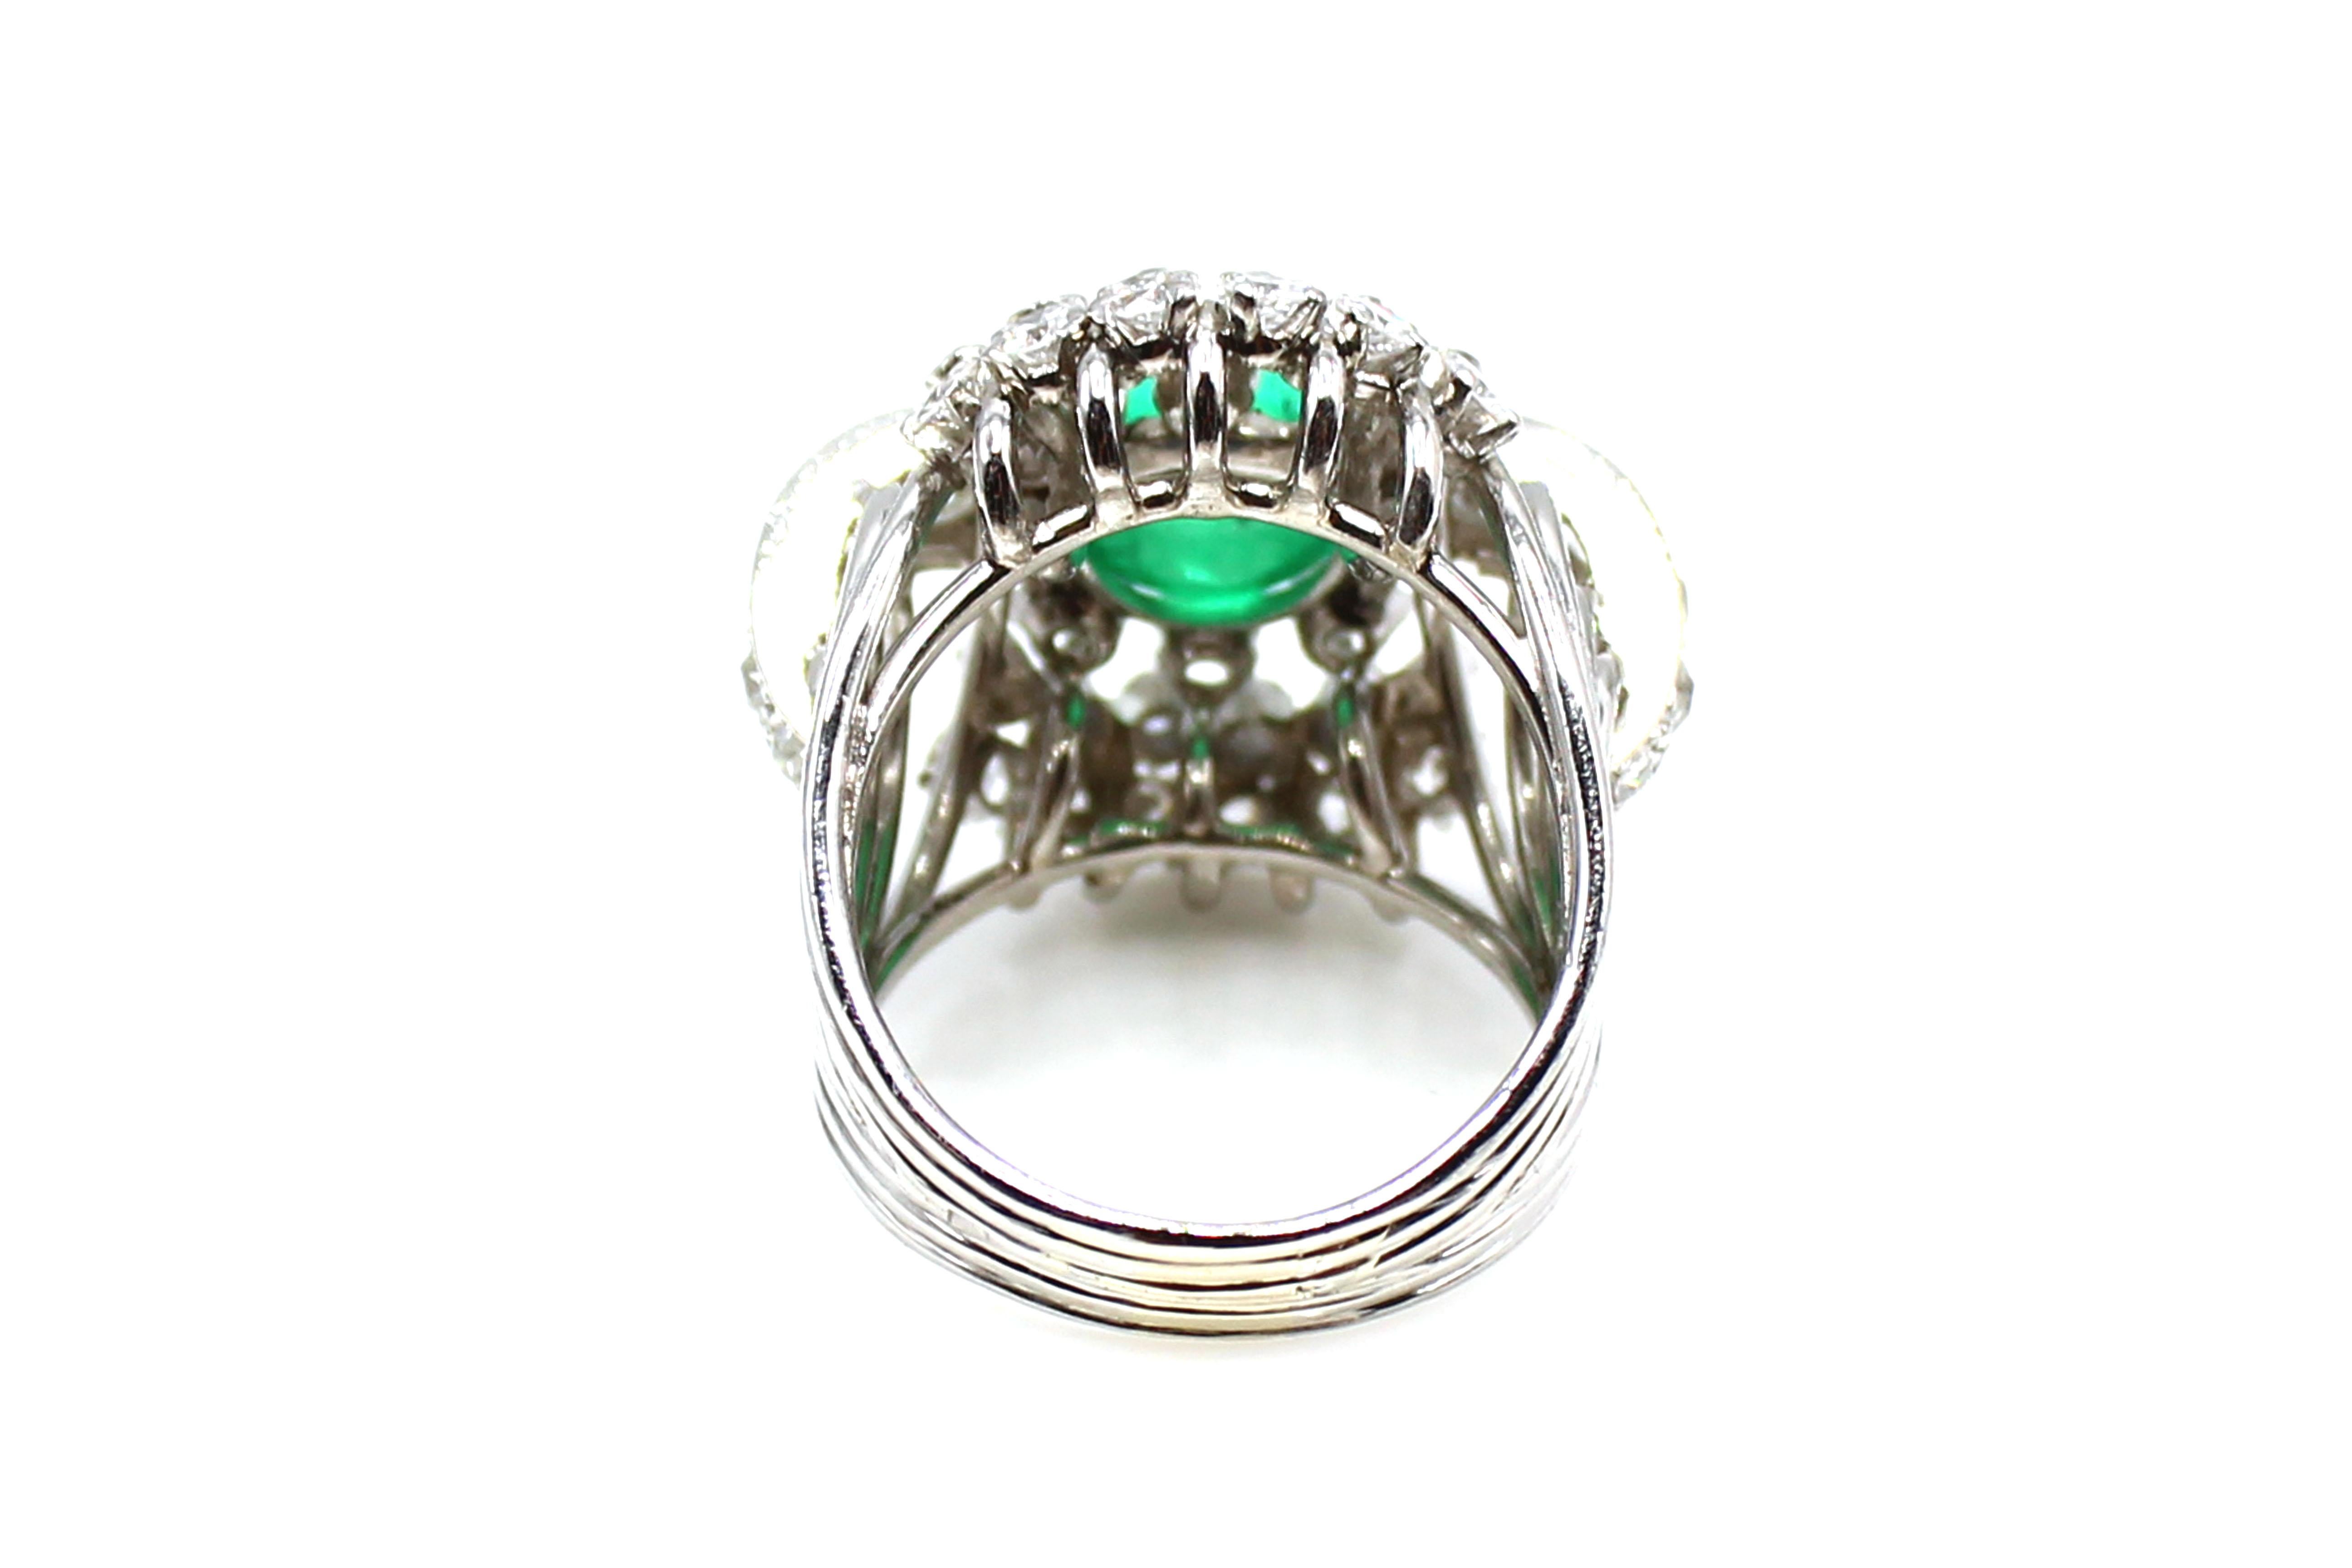 This bold Retro ring from ca. 1950 was wonderfully designed and masterfully hand-crafted in platinum. The center piece of this ring is a deep forest green cabochon emerald measured to weigh approximately 2.5 carats. Surrounding the center gem-stone,